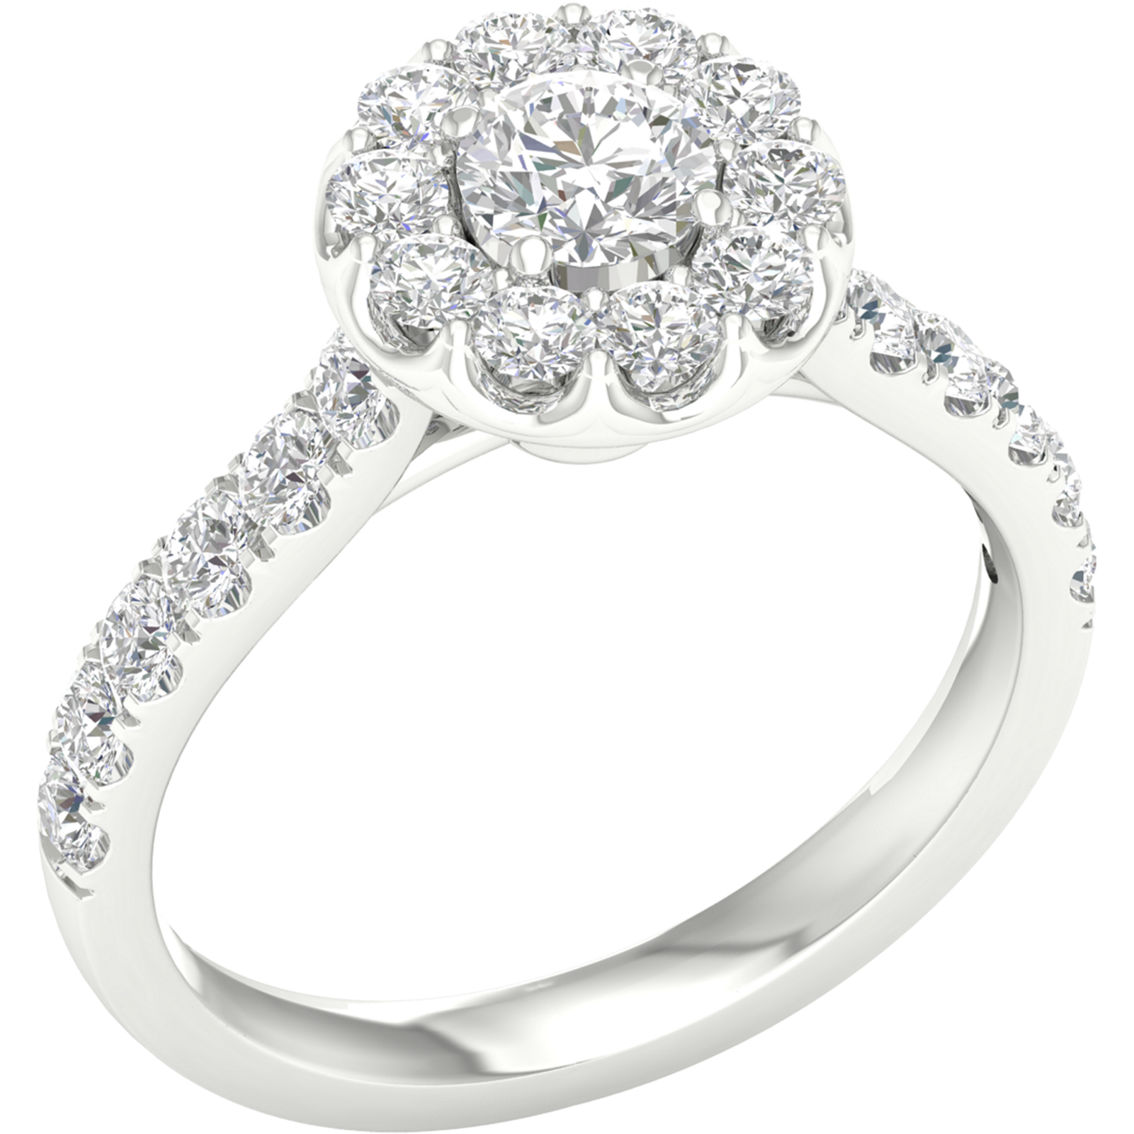 Pure Brilliance 14K White Gold 1 1/2 CTW Engagement Ring IGI Certified Size 7 - Image 2 of 2